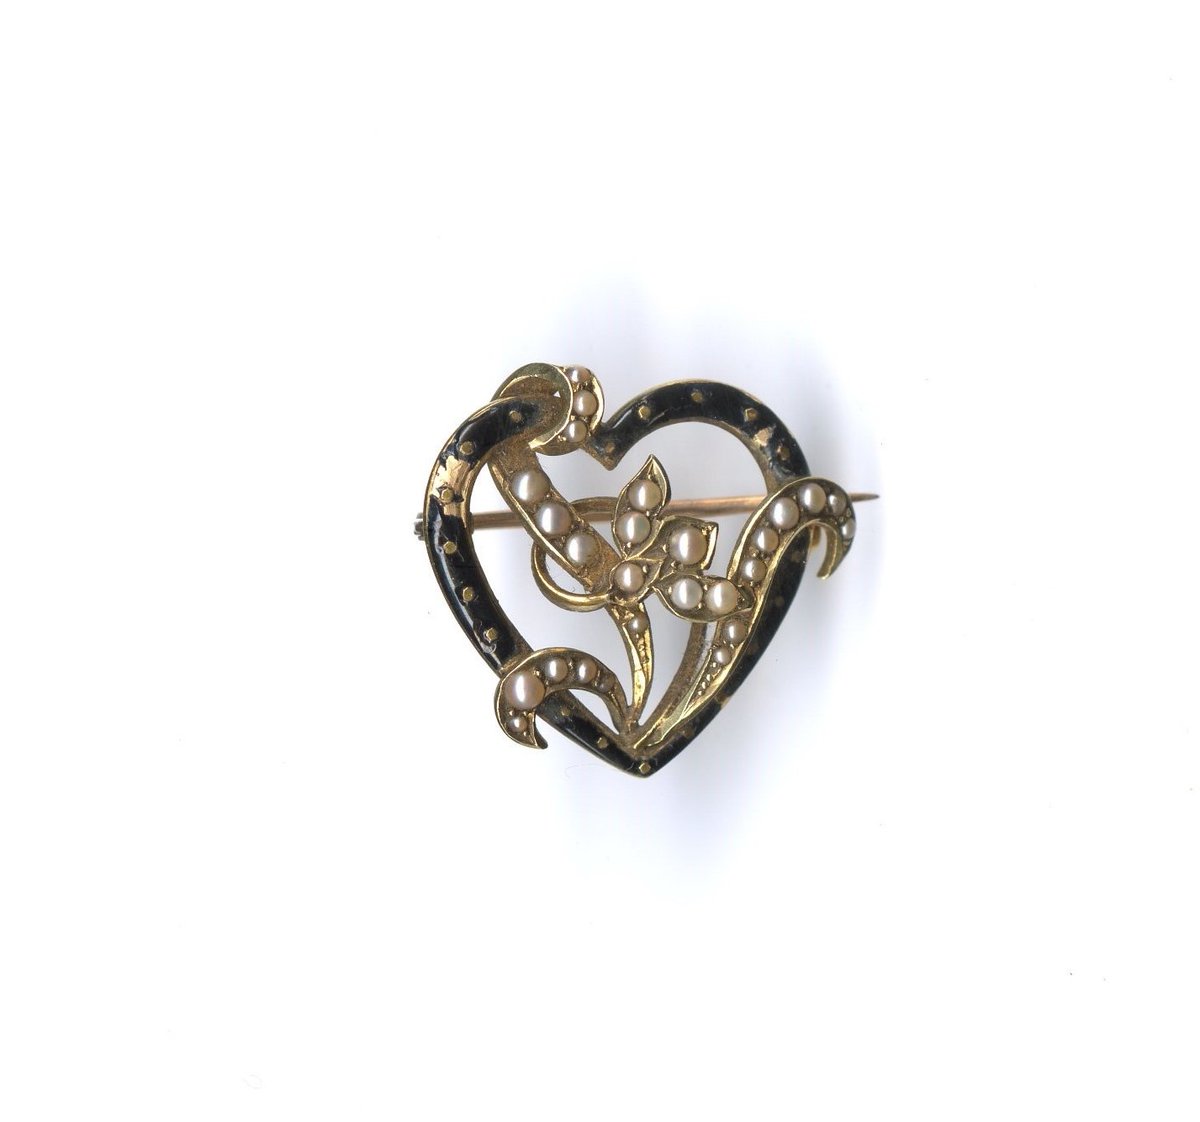 Happy St Valentine’s Day St Valentine’s Day is a centuries old tradition held on 14th February each year where you are encouraged to send messages of love and/or tokens to those who have captured your heart. #ValentinesDay #museum #collection